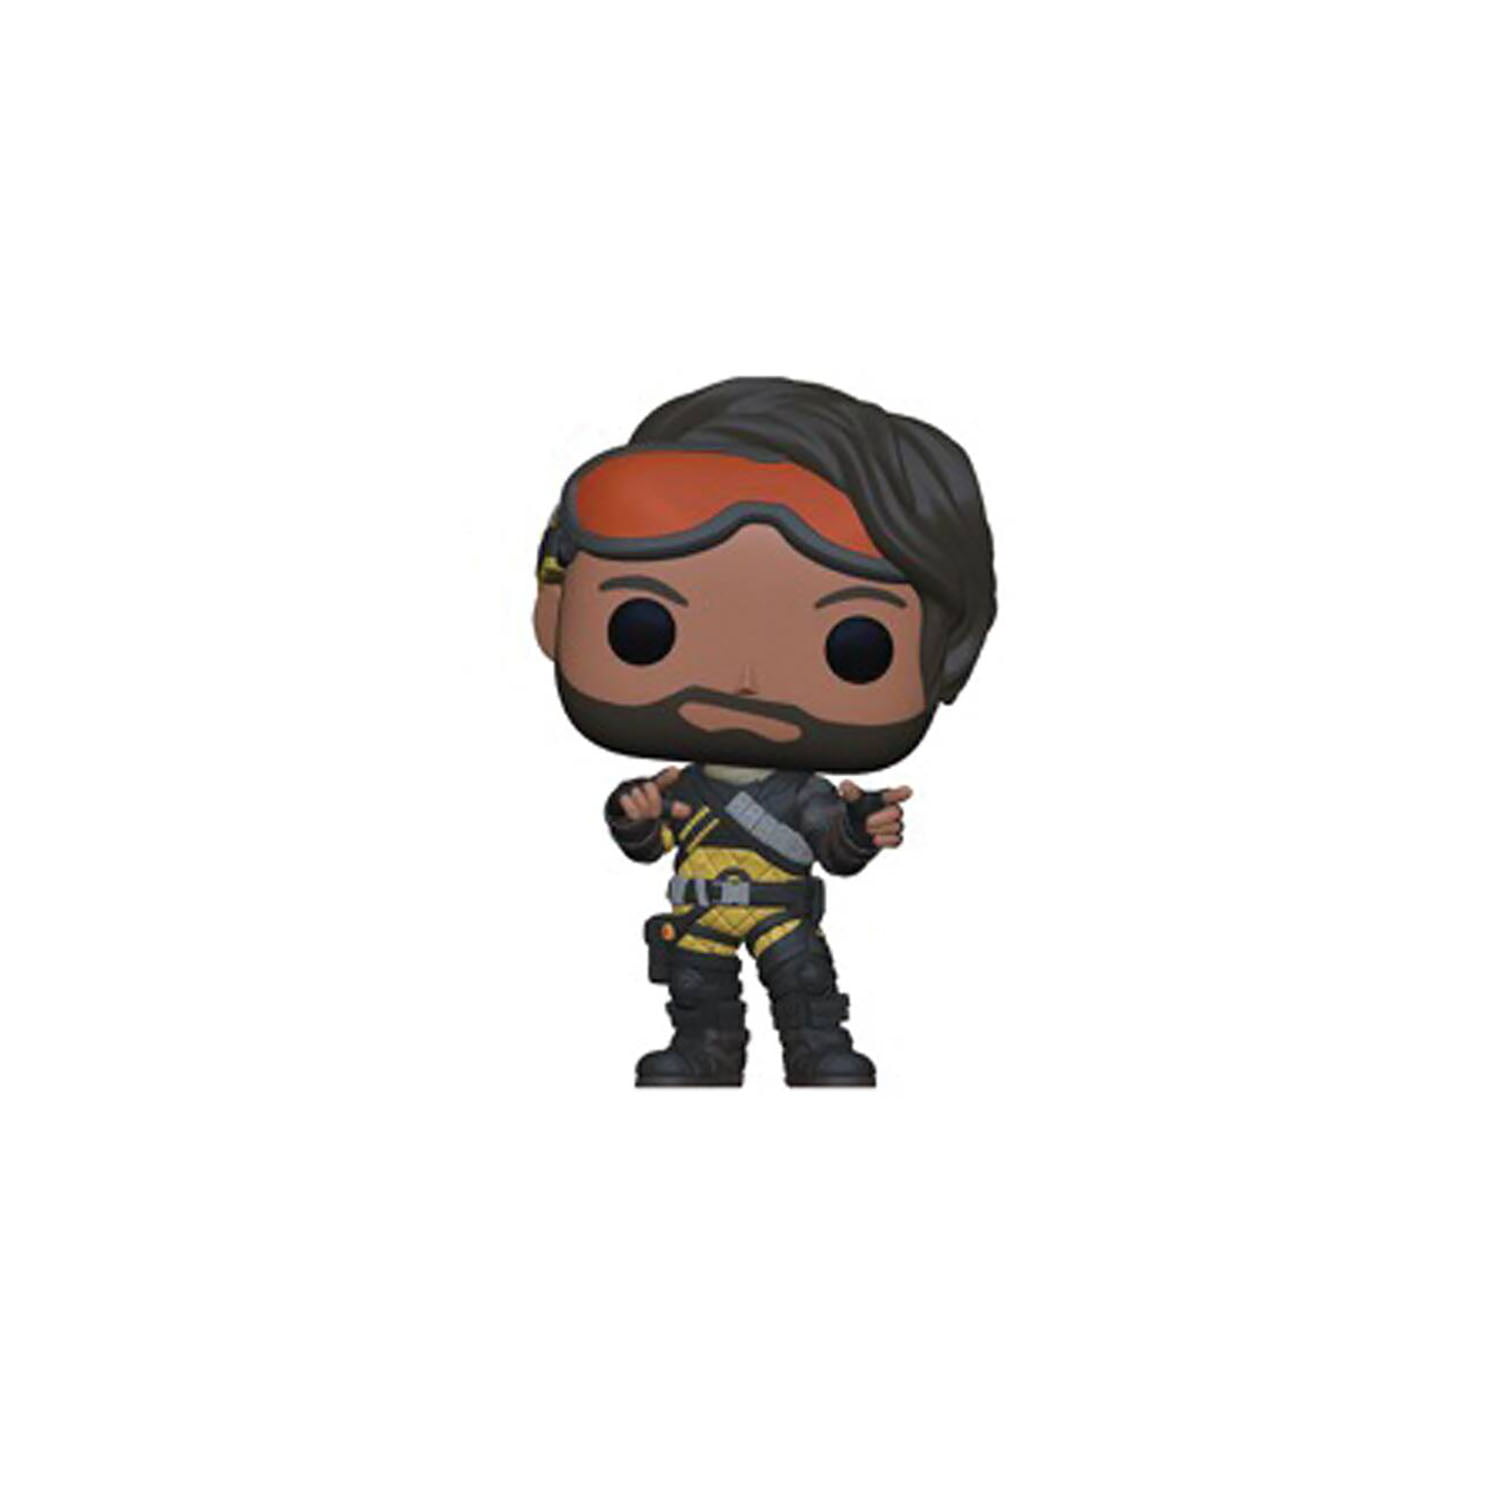 NEW OFFICIAL FUNKO POP GAMES APEX LEGENDS MIRAGE COLLECTABLE FIGURE 